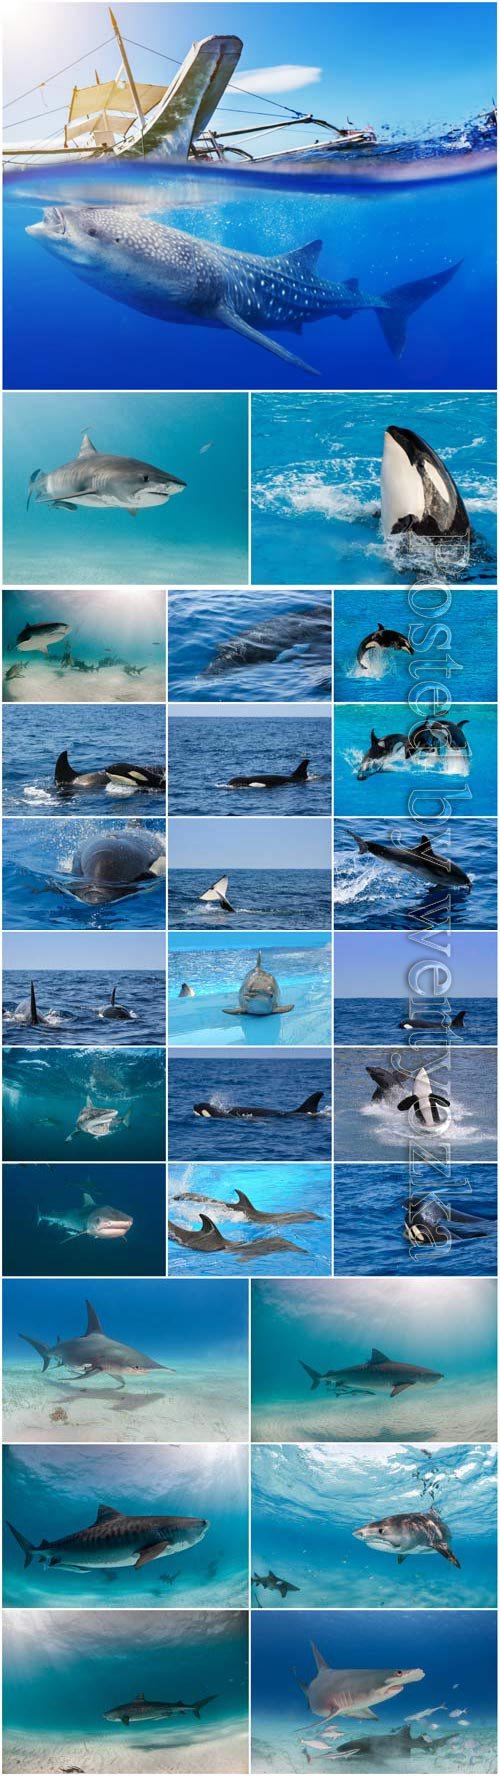 Dolphins, whales and sharks stock photo